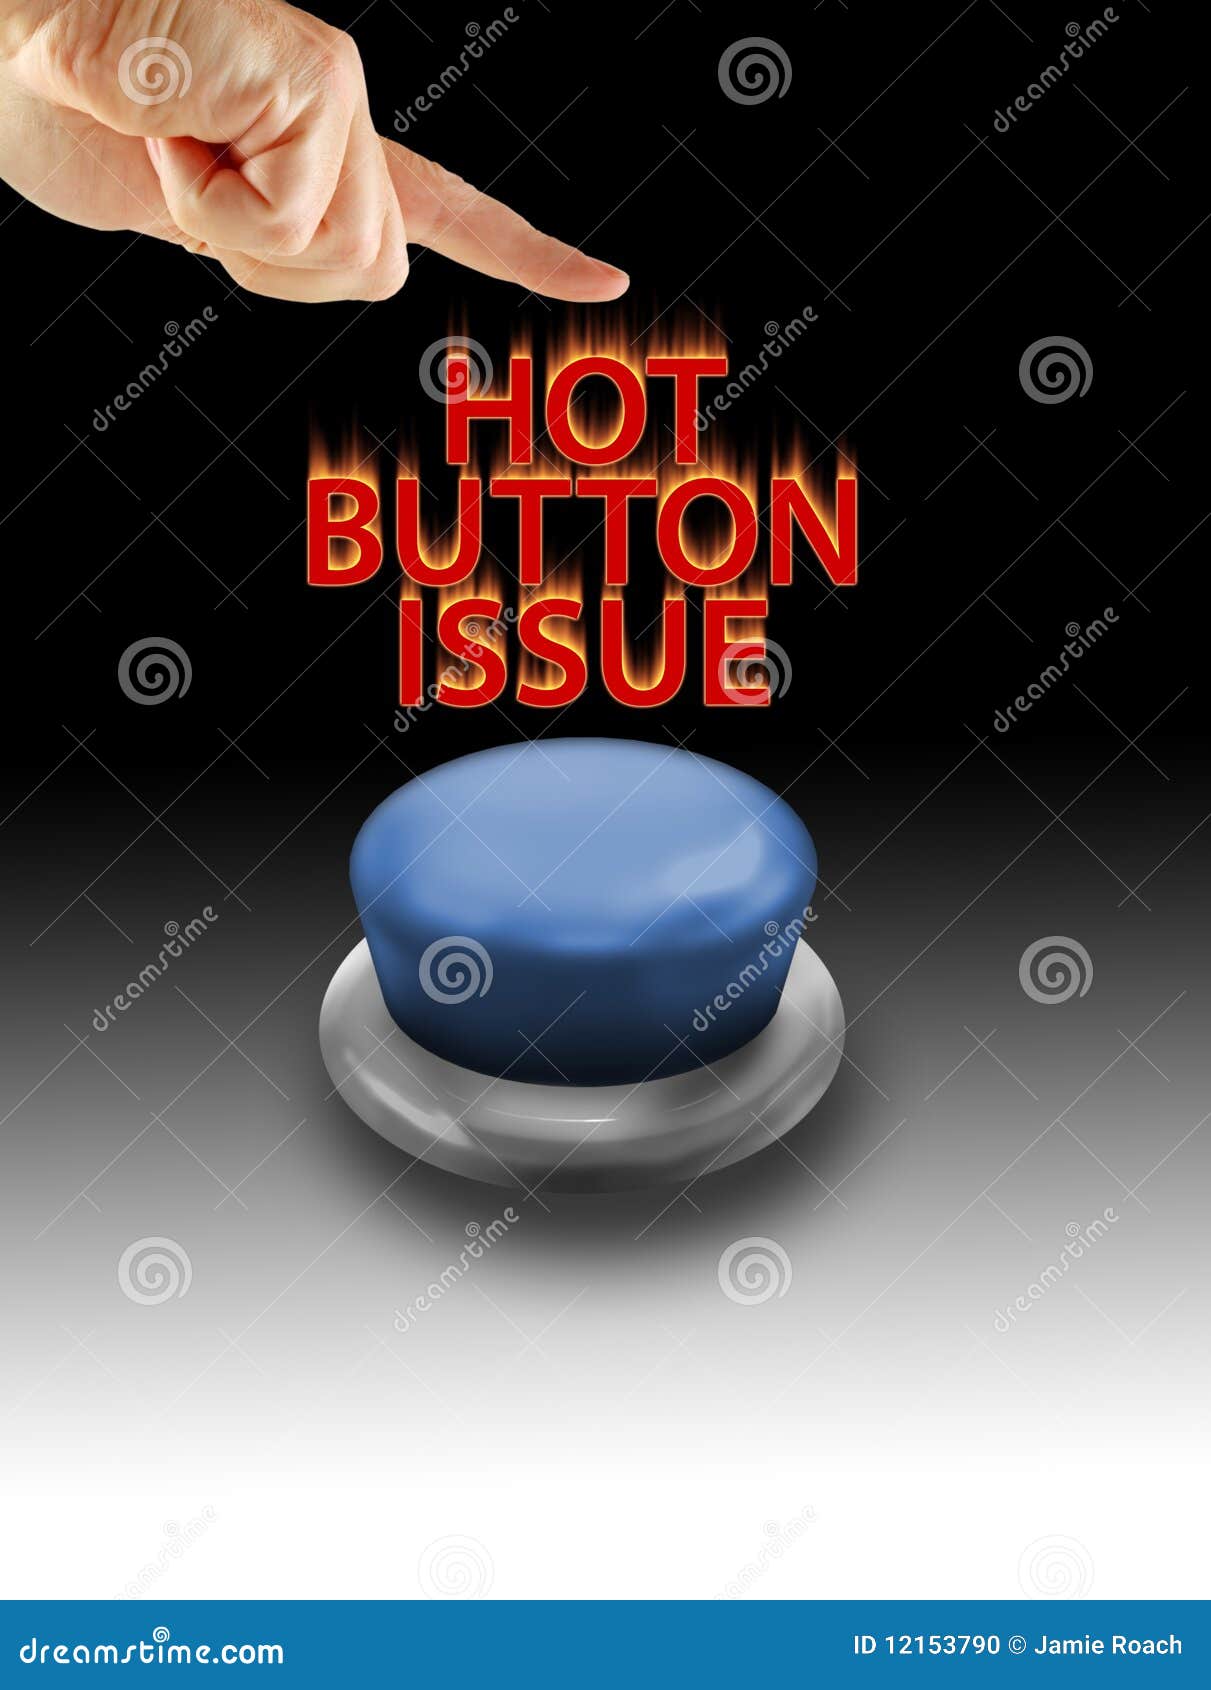 hot button issue